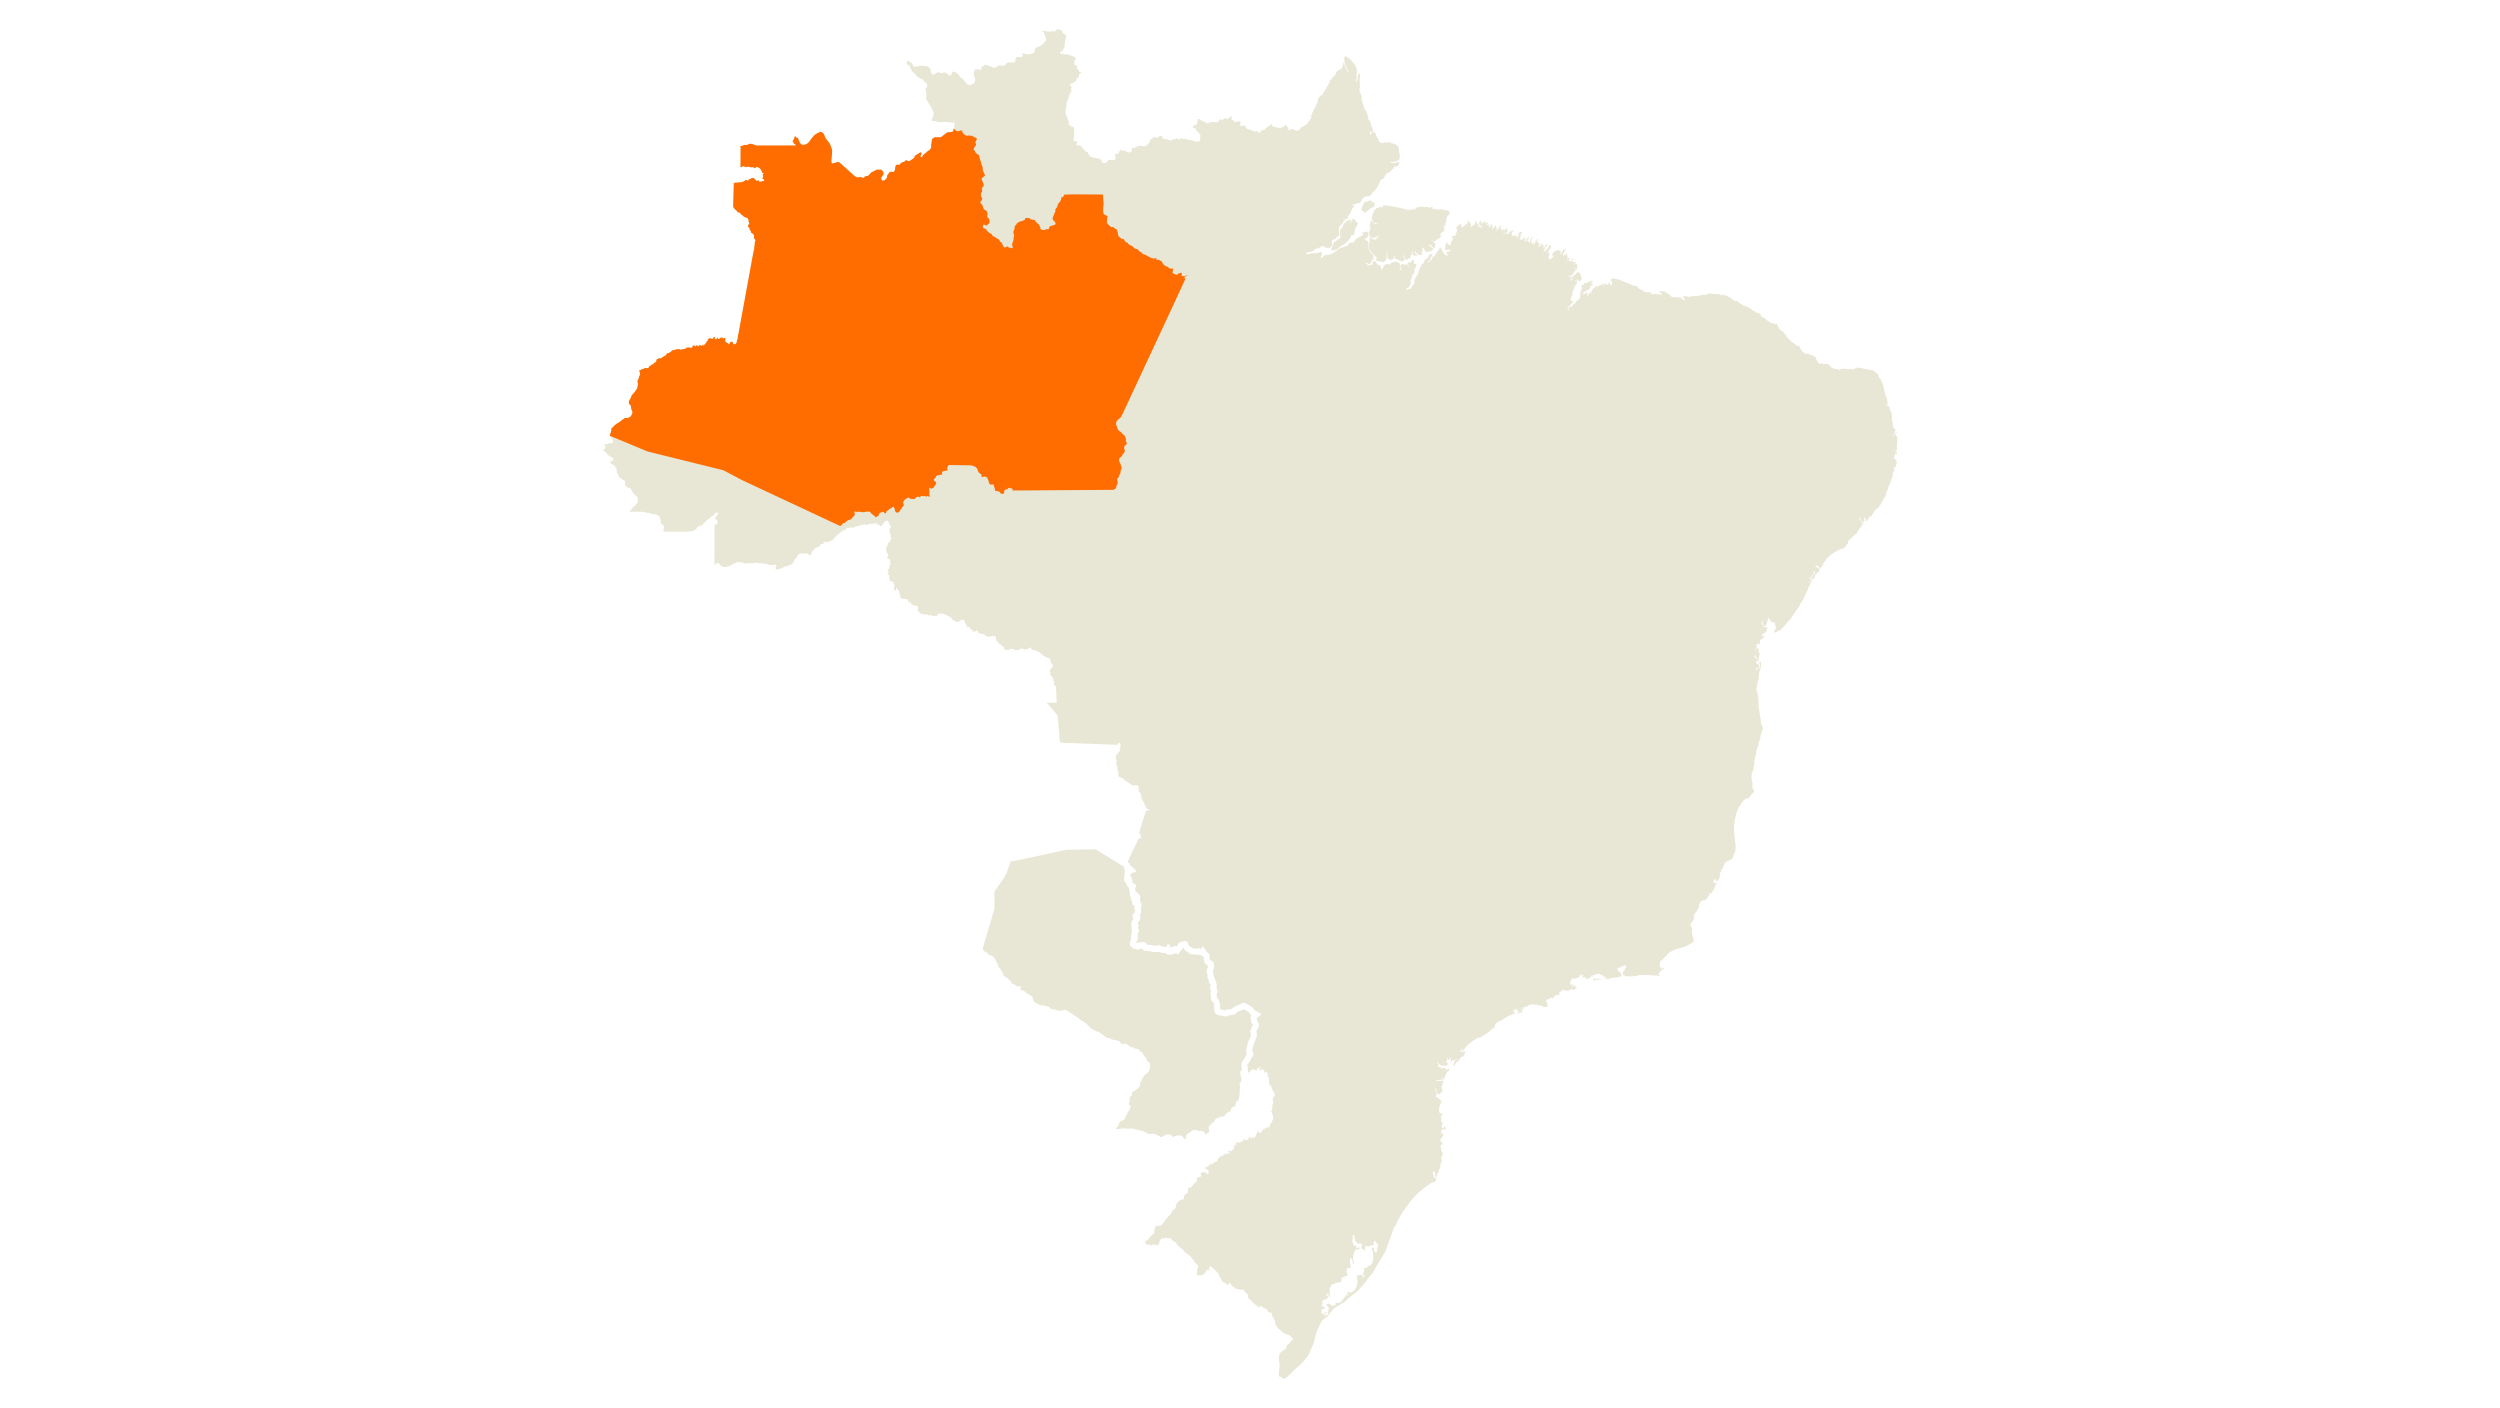 kws_br_consultant_map_01.png